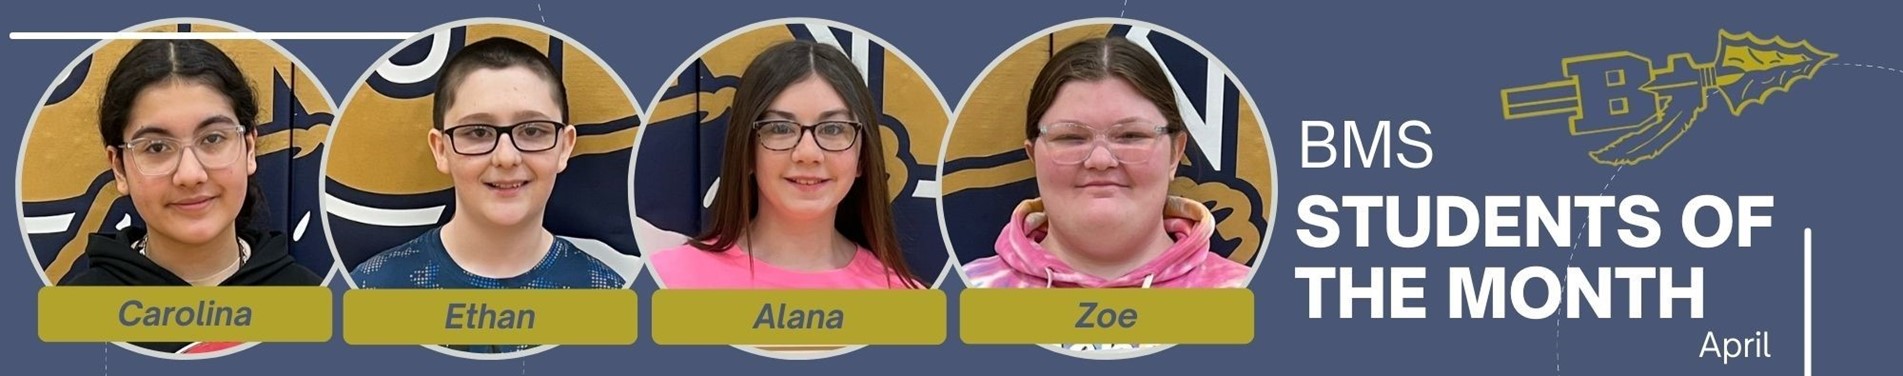 BMS Students of the Month - April